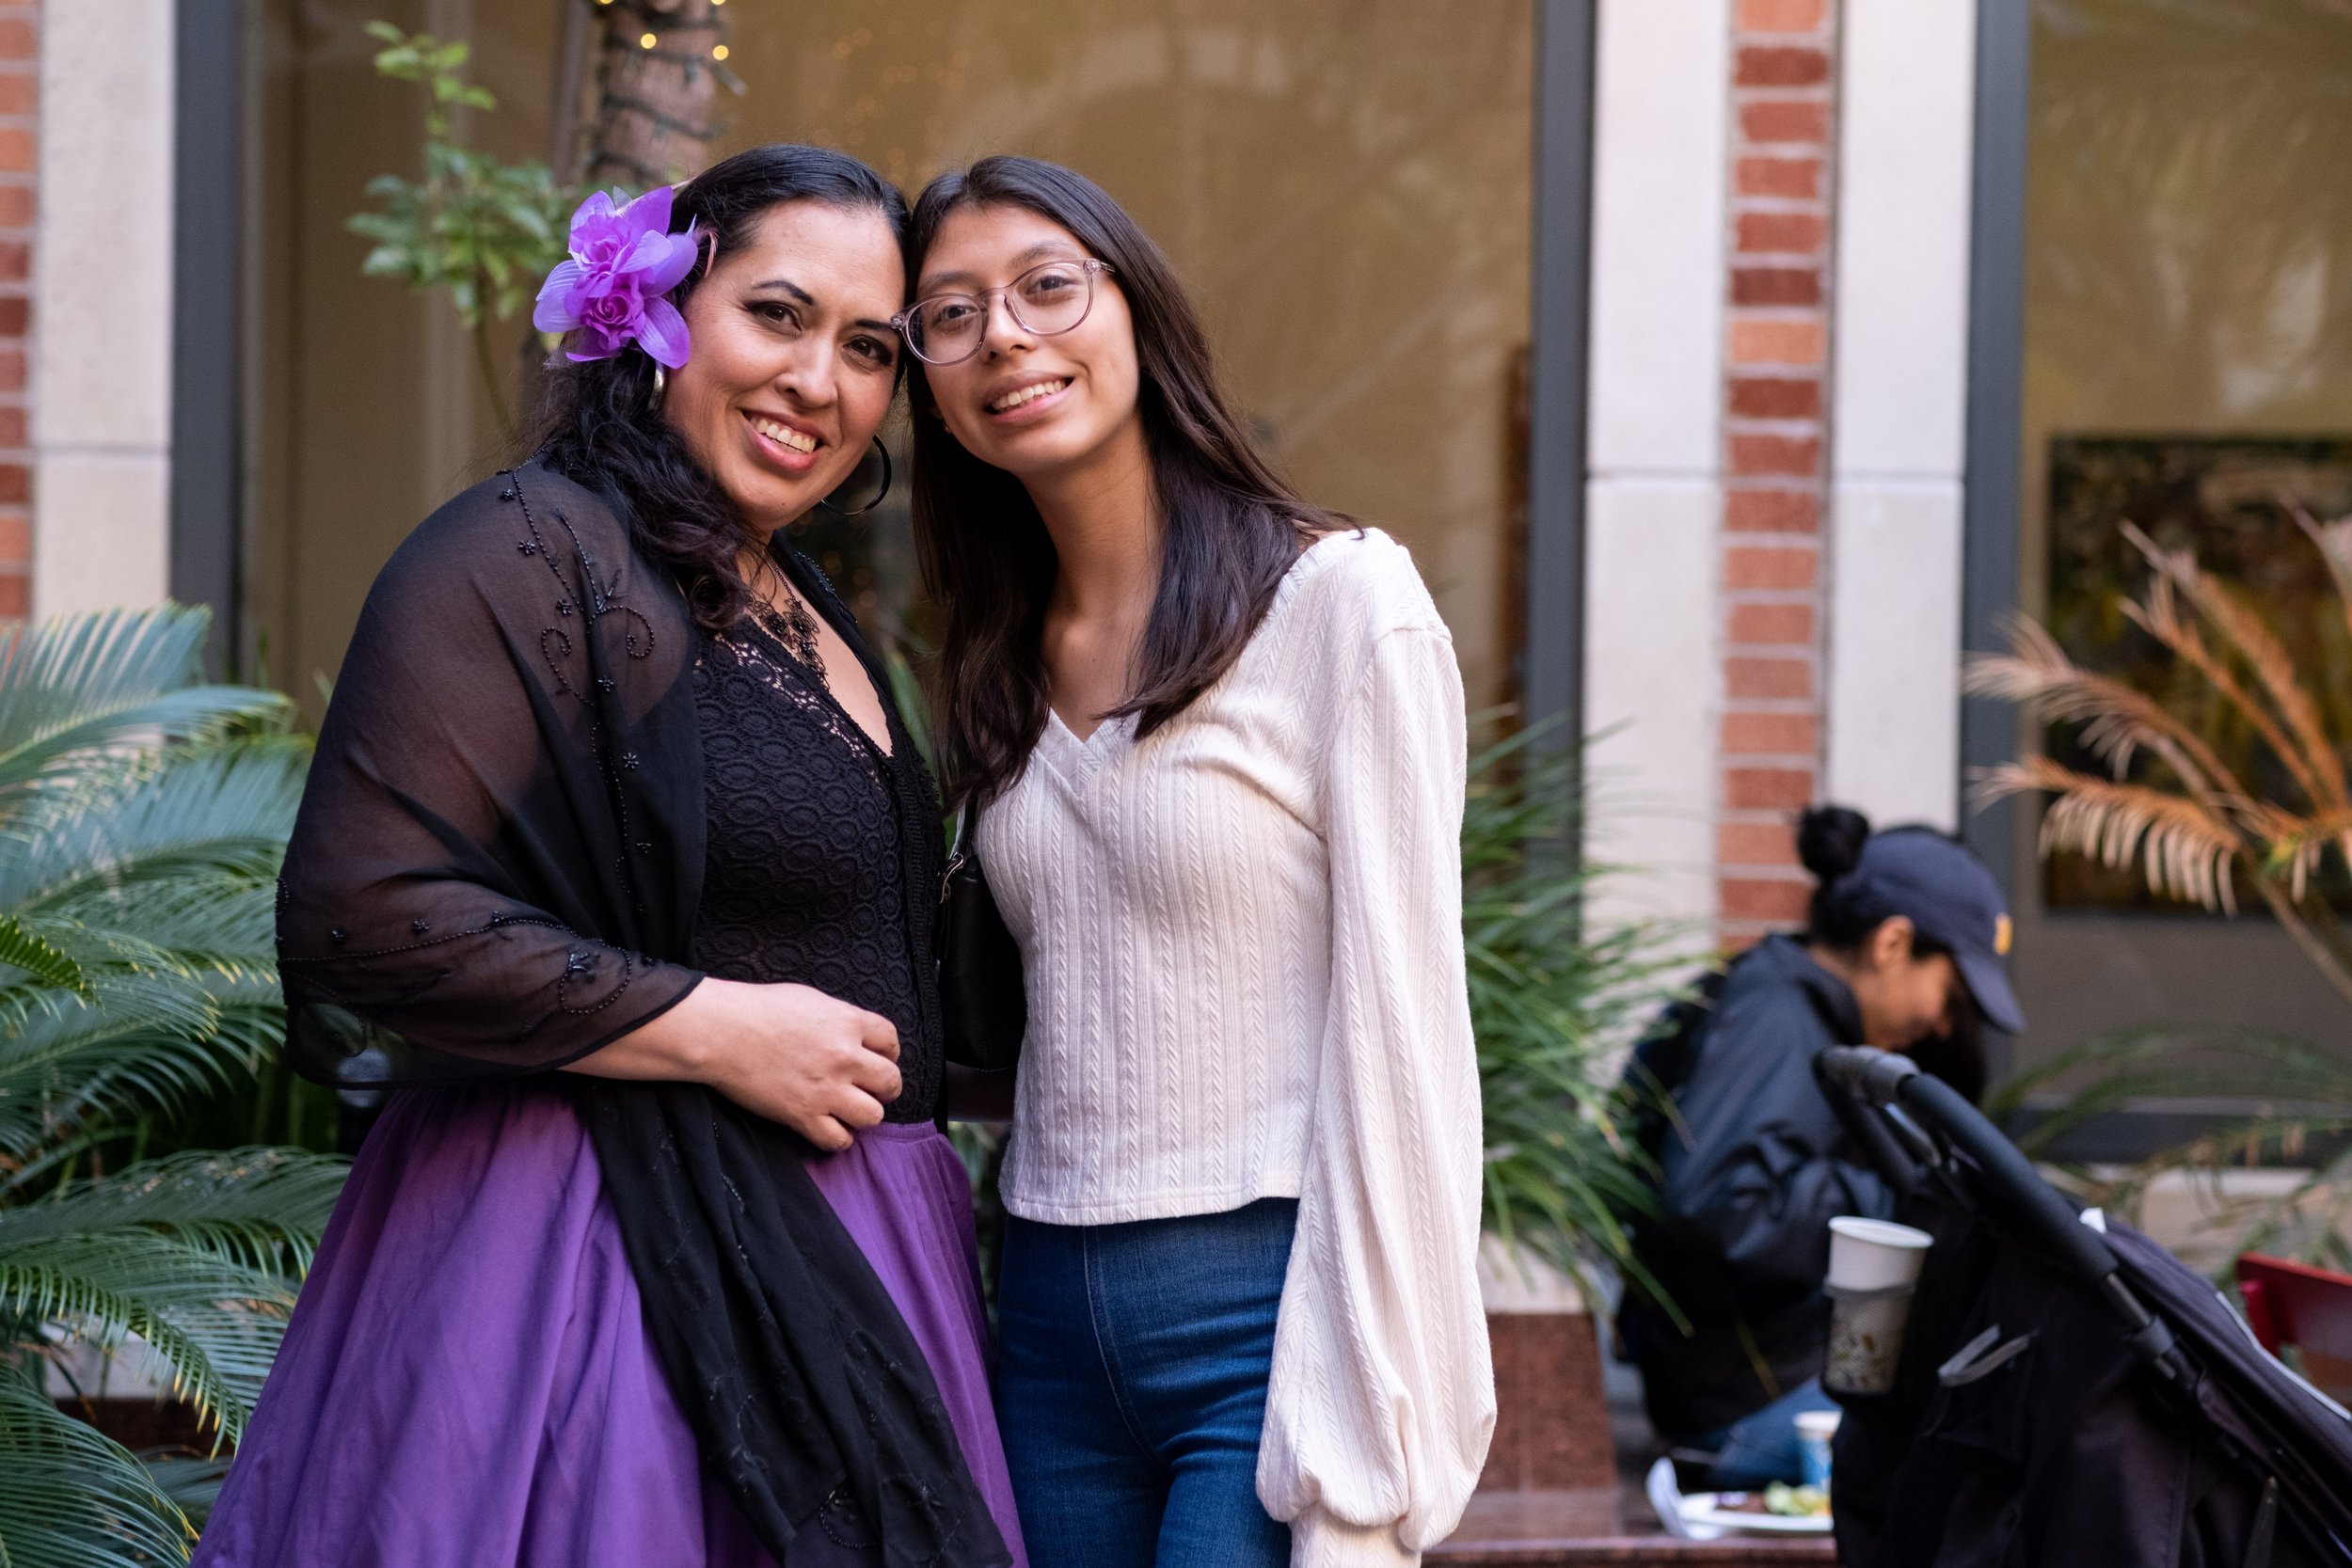  Ana Guzman, one of the grandmothers profiled in the movie, poses with her daughter at the screening of "Abuelita’s Kitchen: Mexican Food Stories," at UCLA's Fowler Museum on Saturday March 4th, 2023. (Akemi Rico | The Corsair) 